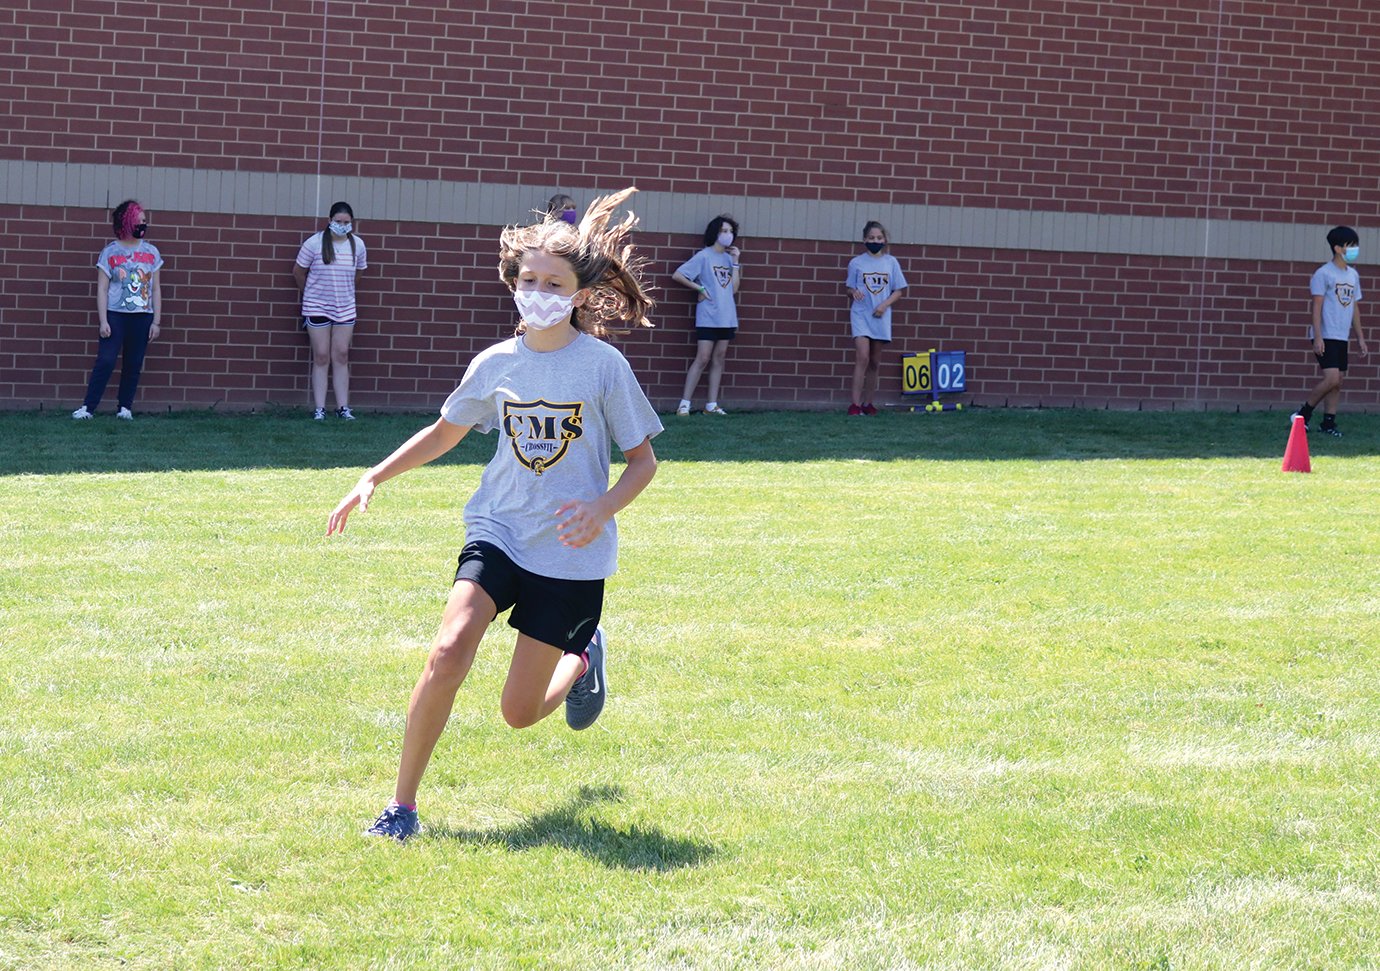 Sixth-grade student Sydney Elizonzo heads to first base Tuesday during a cardio softball game at Crawfordsville Middle School in which students play timed innings instead of counting "outs."